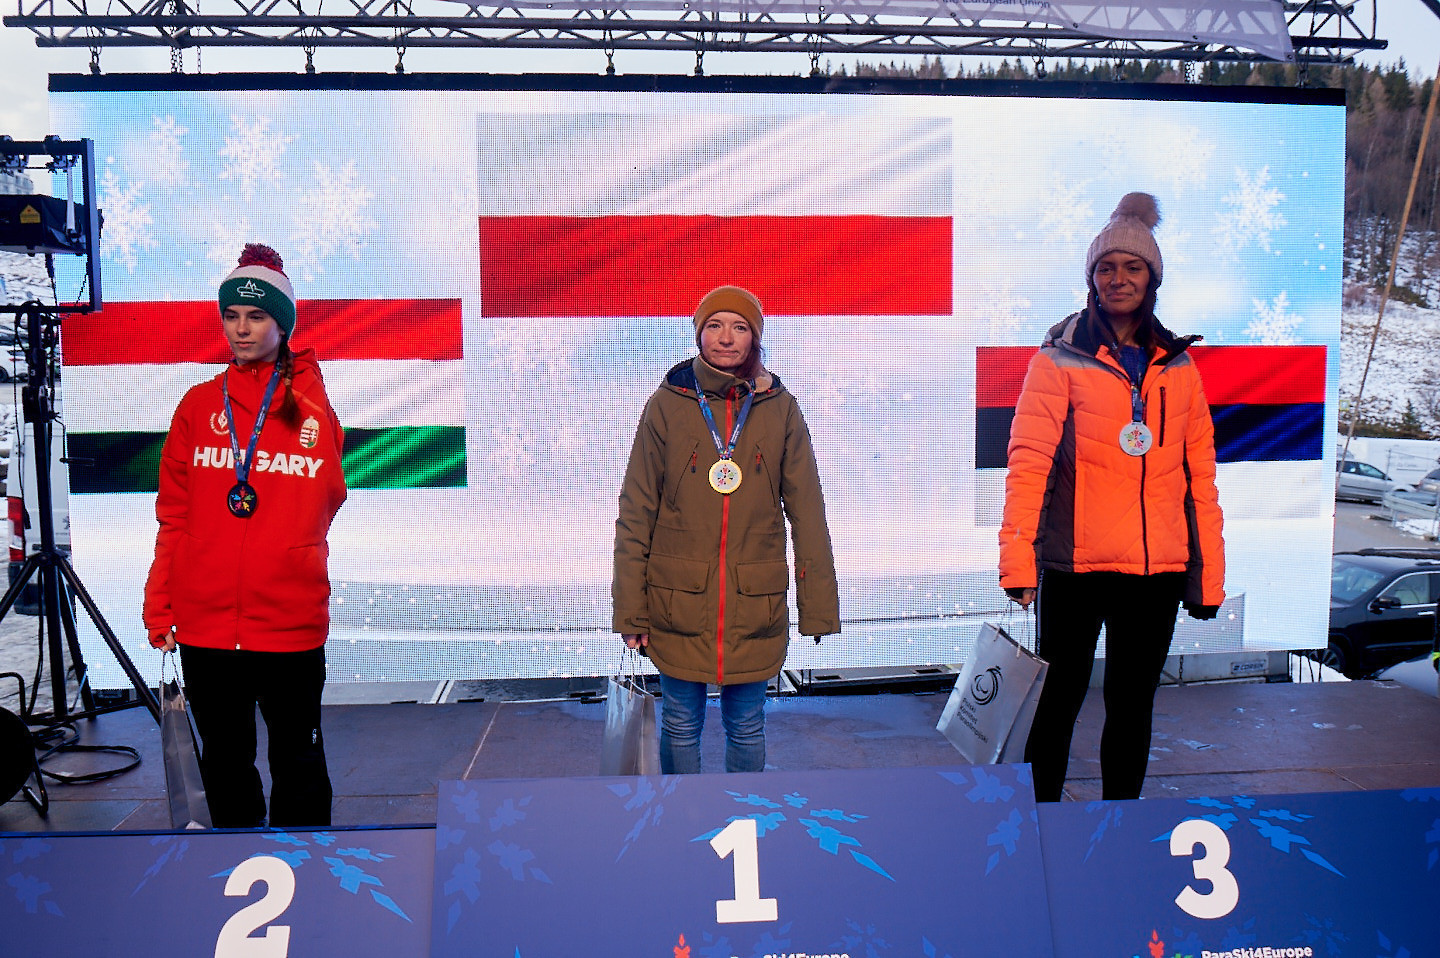 Home snowboarder Kotzian among winners as European Winter Para Sports Event concludes